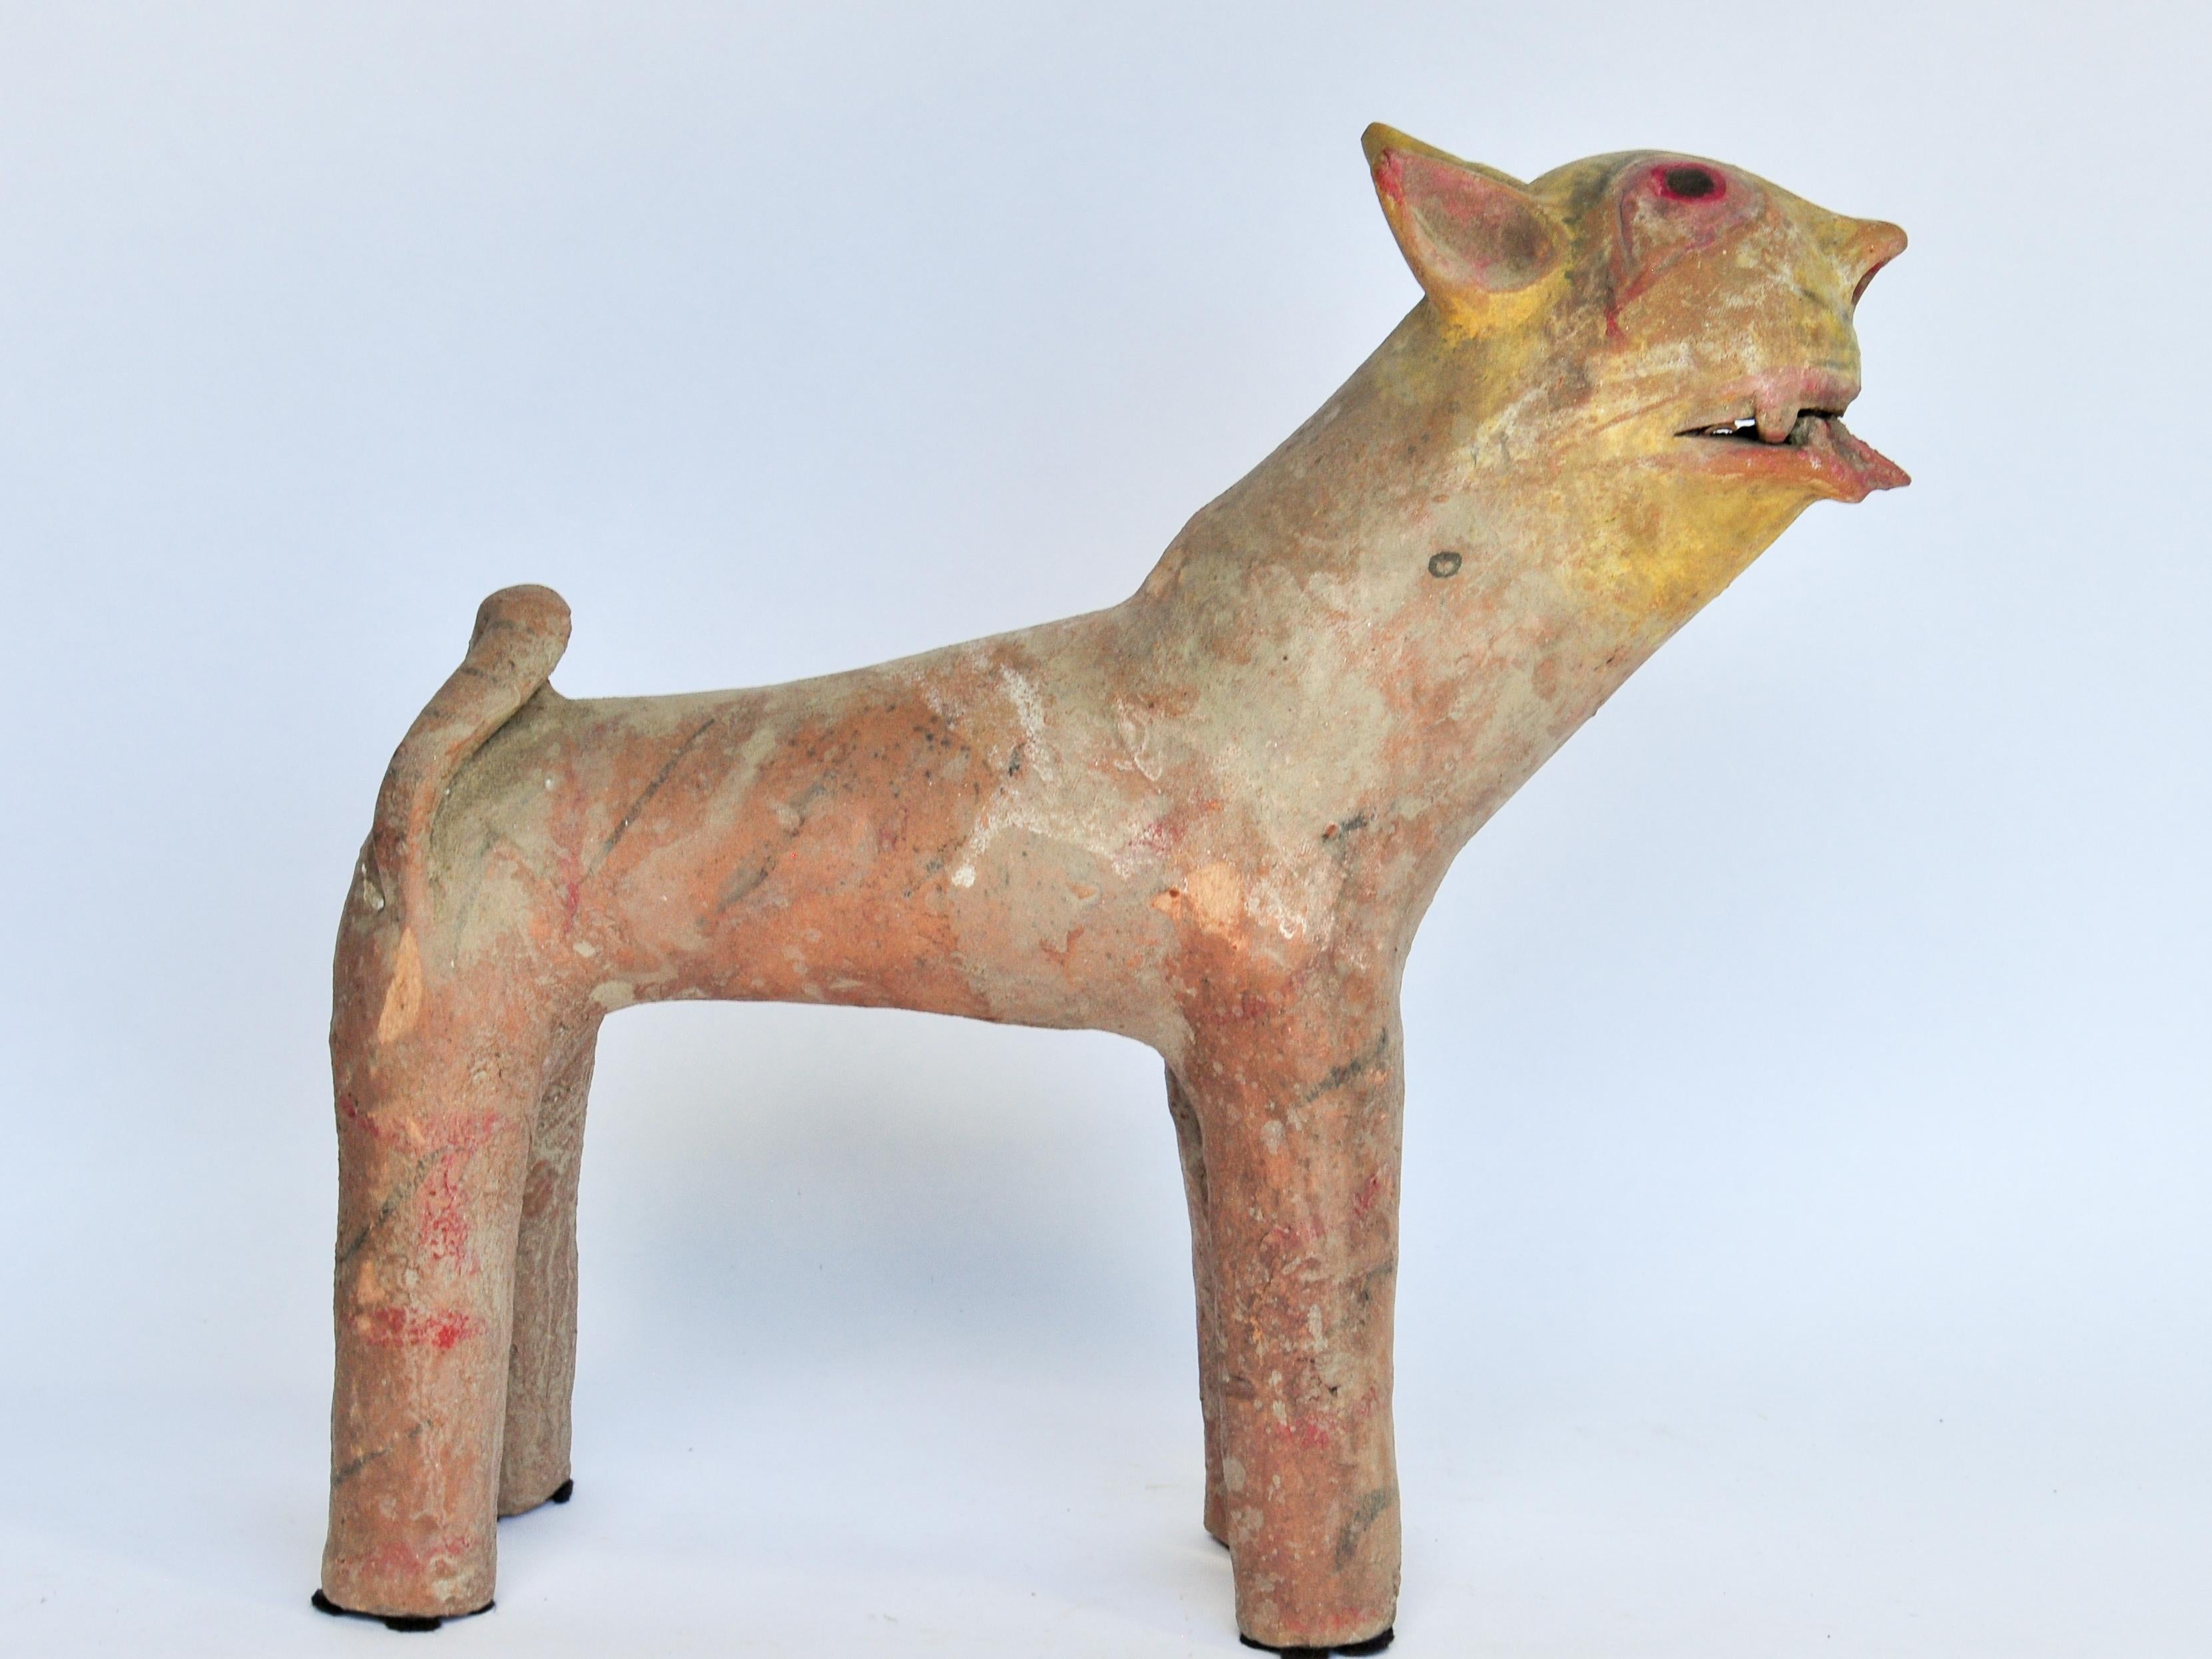 Hand-Crafted Painted Terracotta Tiger Figure, Rural Shrine Offering, Bengal Late-20th Century